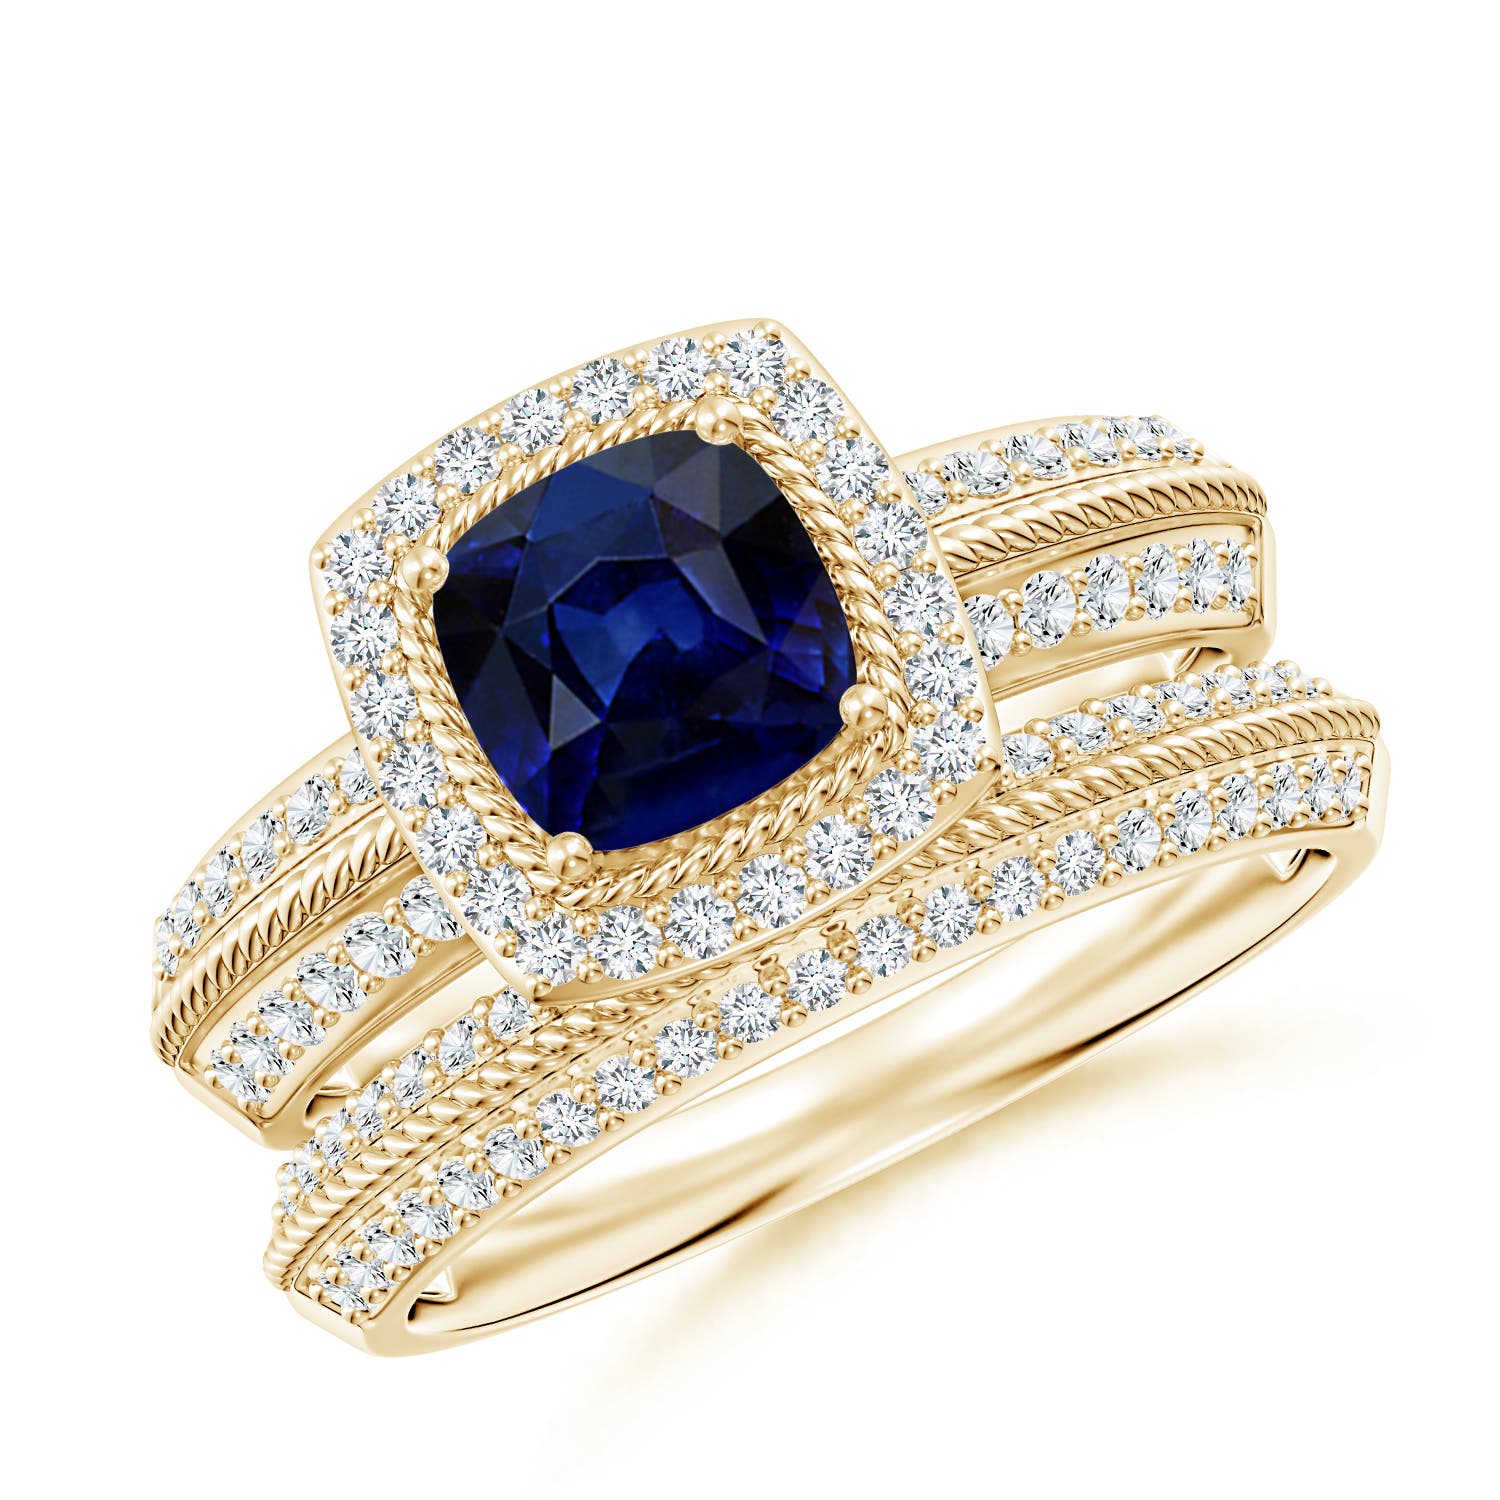 AAA - Blue Sapphire / 1.63 CT / 14 KT Yellow Gold